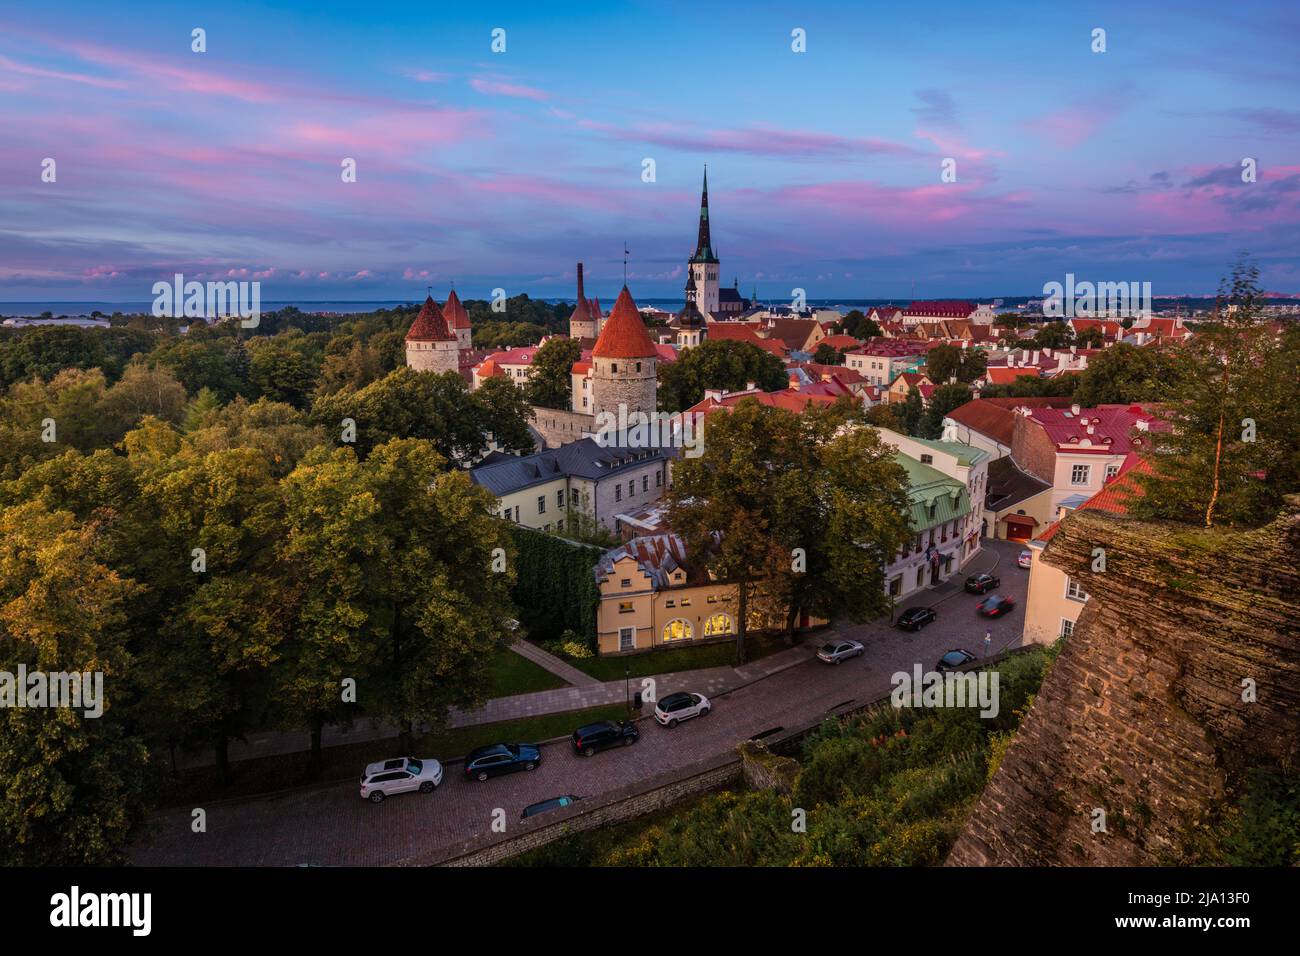 View of the old town in Tallinn, Estonia during a colourful sunset Stock Photo